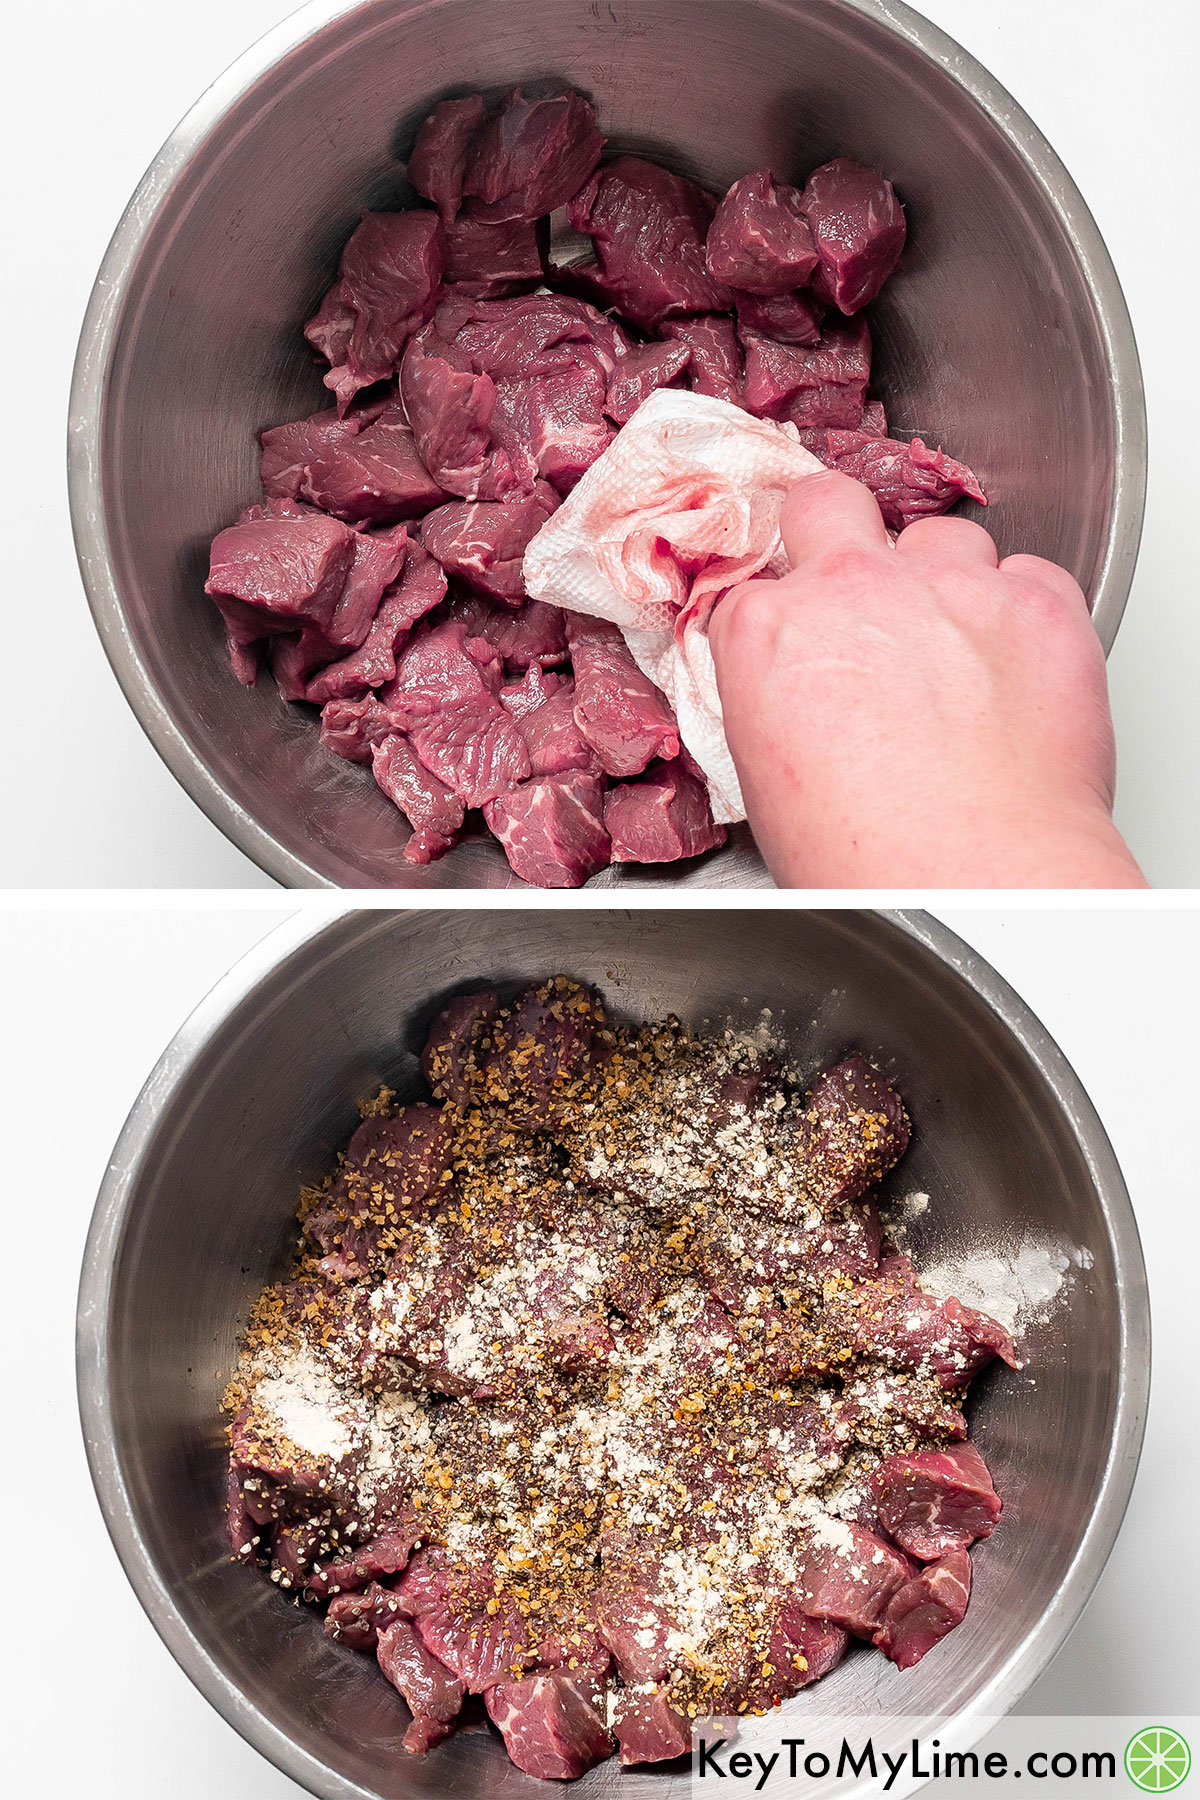 Drying the beef tips with a paper towel and then sprinkling on steak spice and garlic.